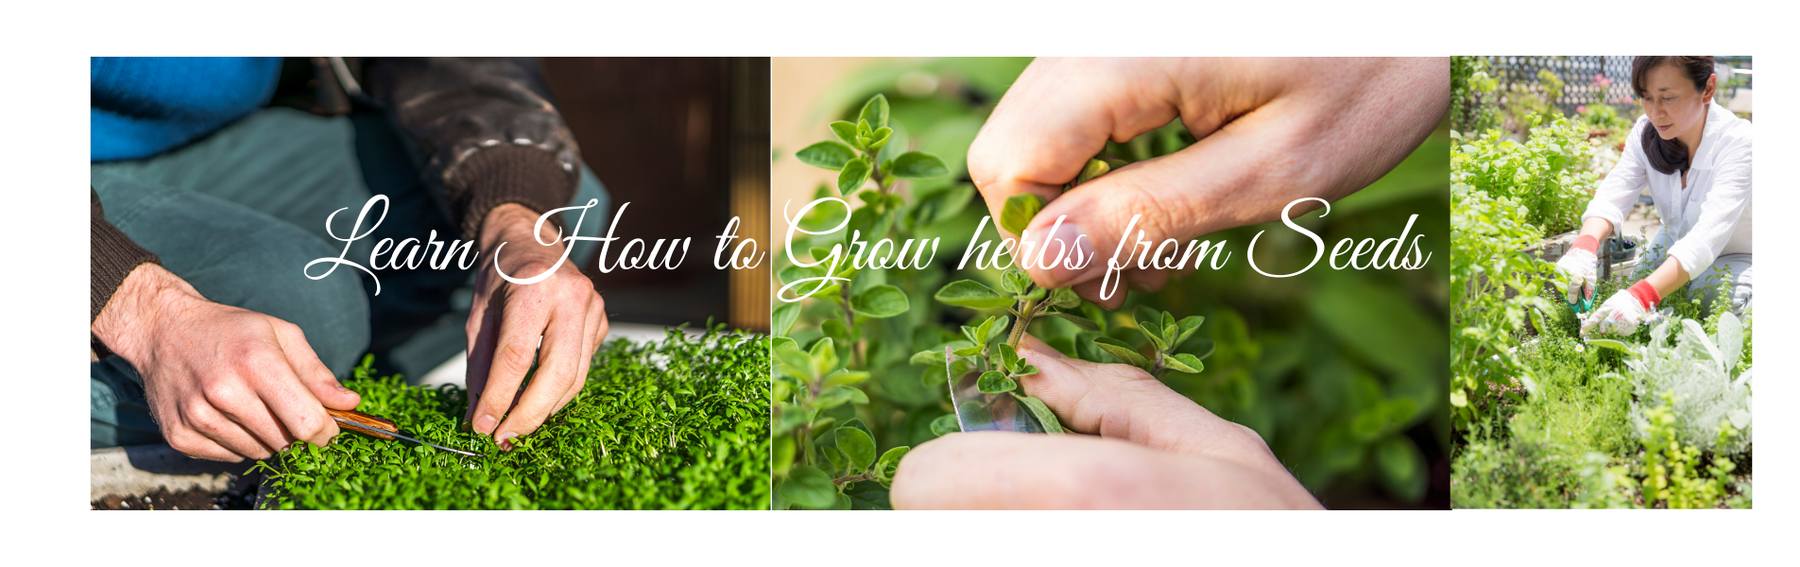 Let's Learn How To Grow Herbs from Seeds - CGASPL